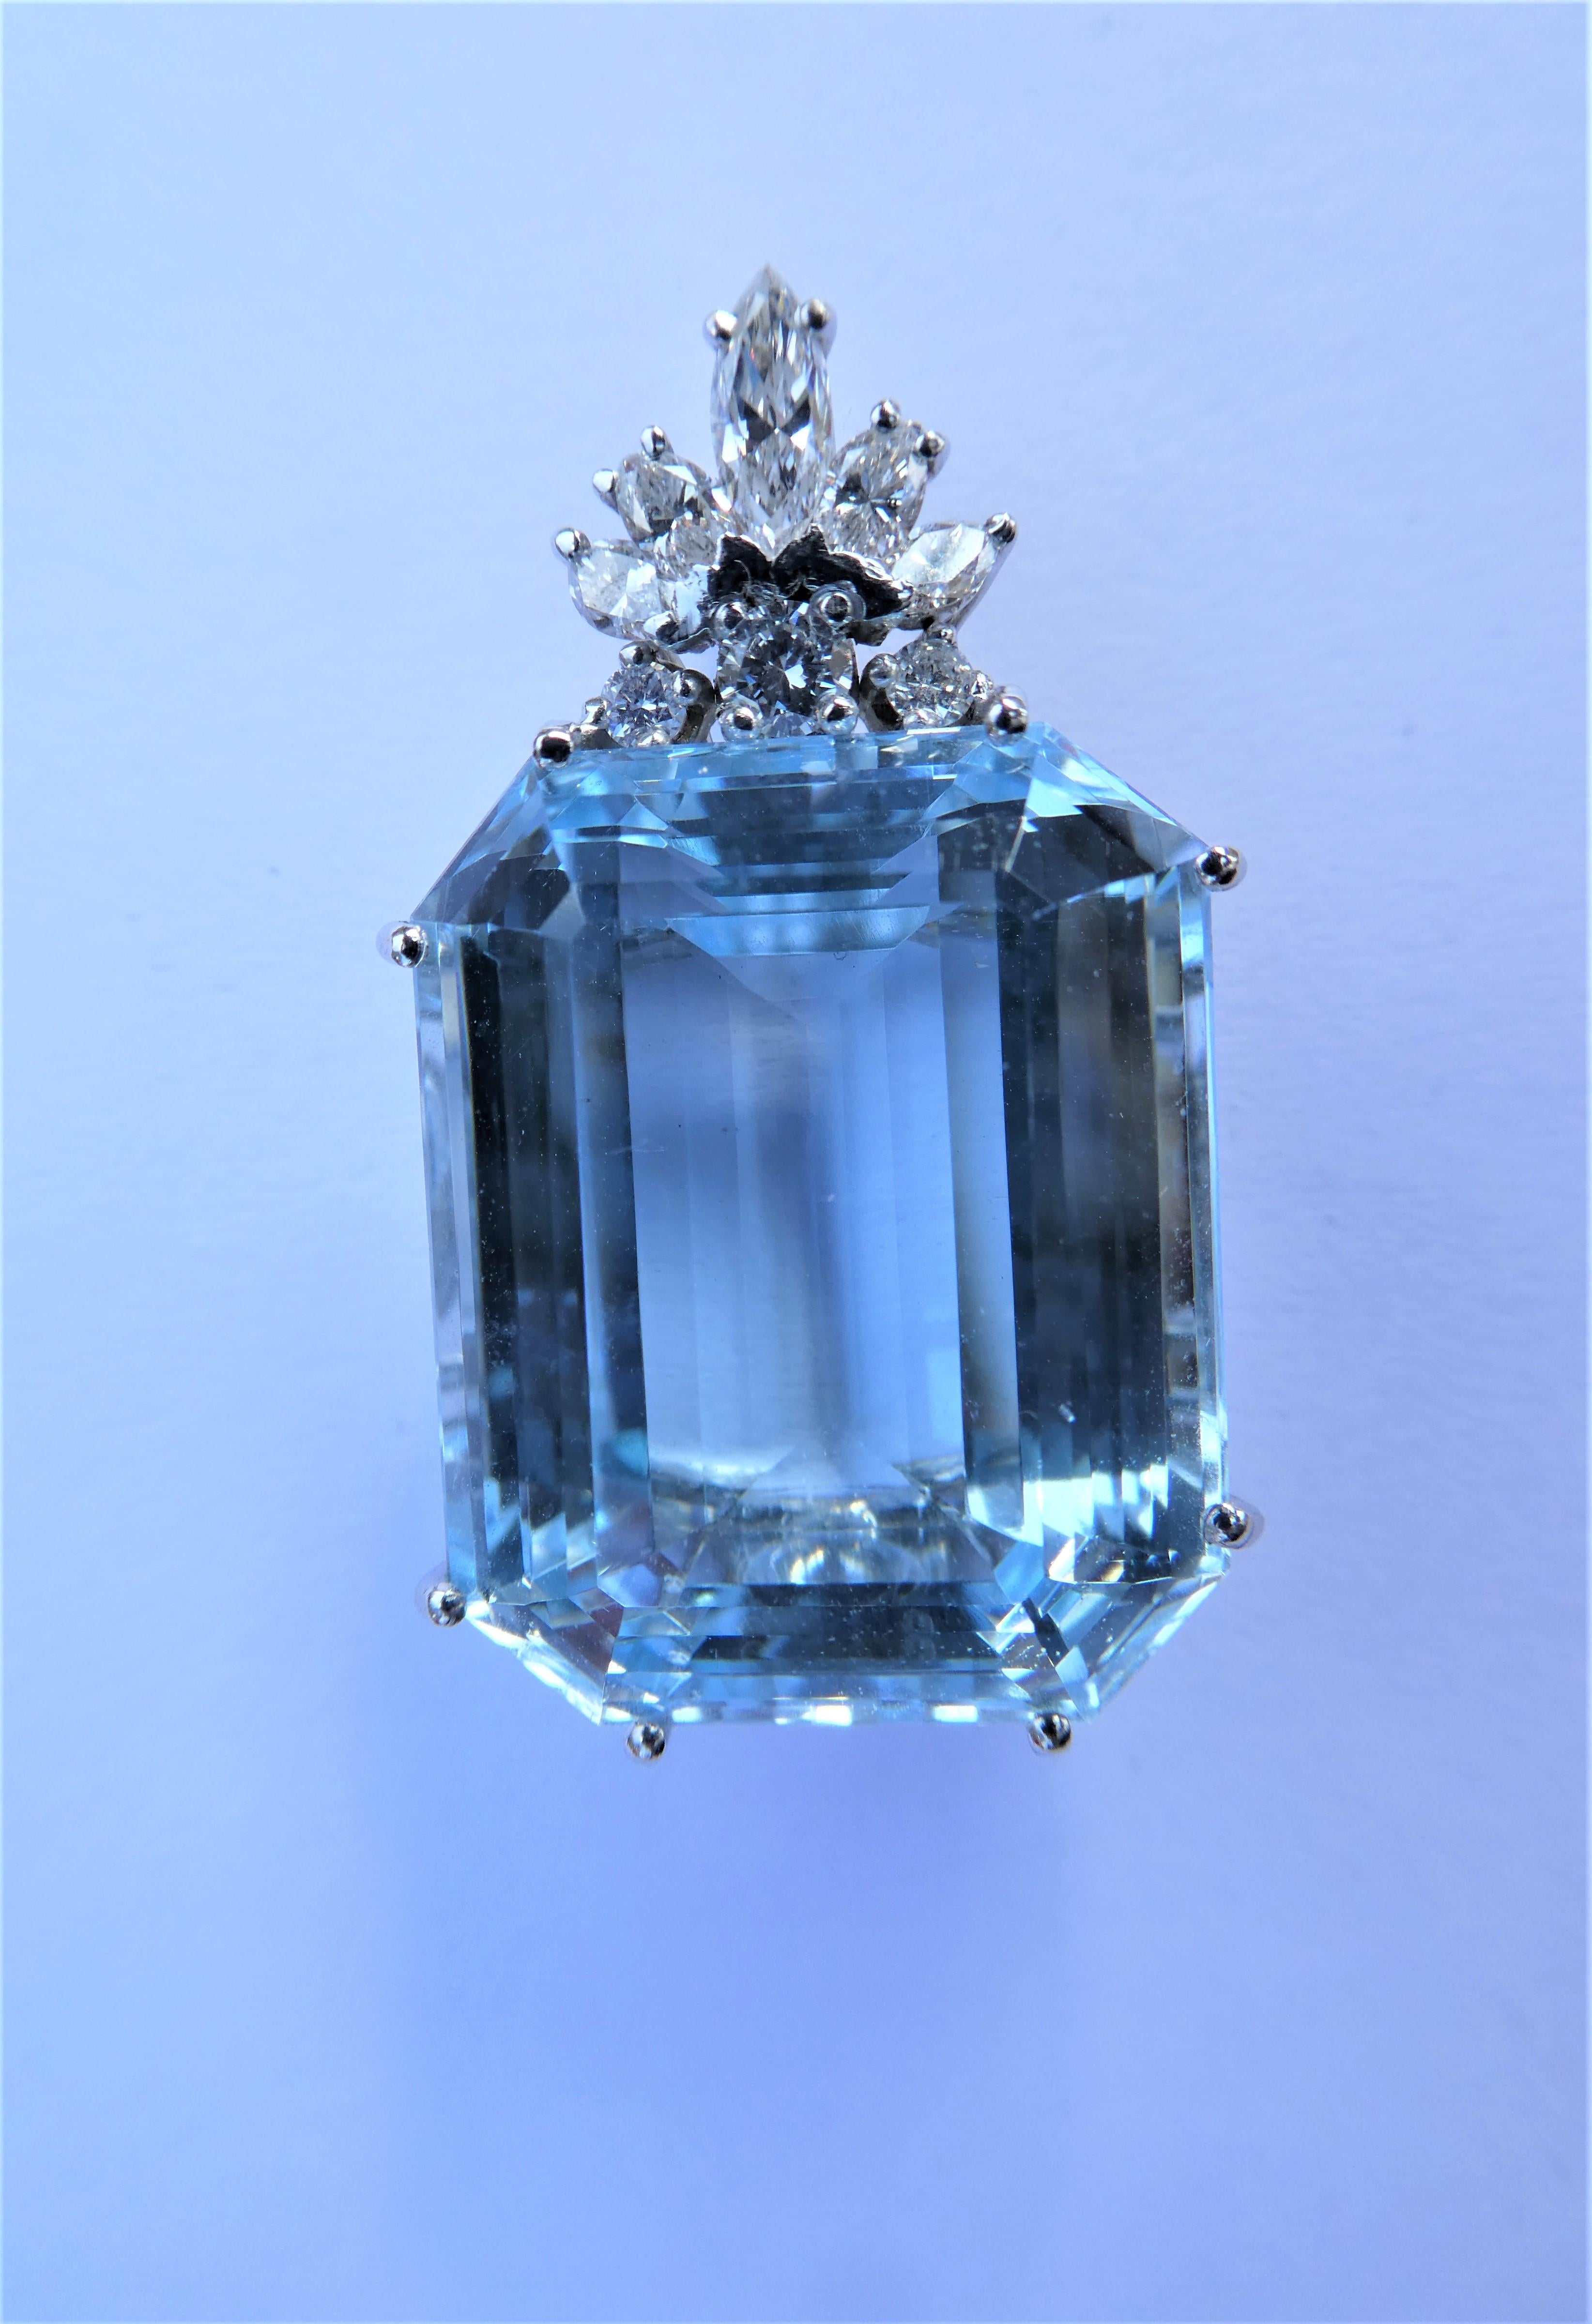 The emerald cut Topaz weighs 48.8 carat and has a vibrant blue colour. It looks a bit like an aquamarine but it comes with a certifcate saying that it is a blue topaz octagon. It was crafted in 18 karat white gold ( Two stamps of 750) in Germany in